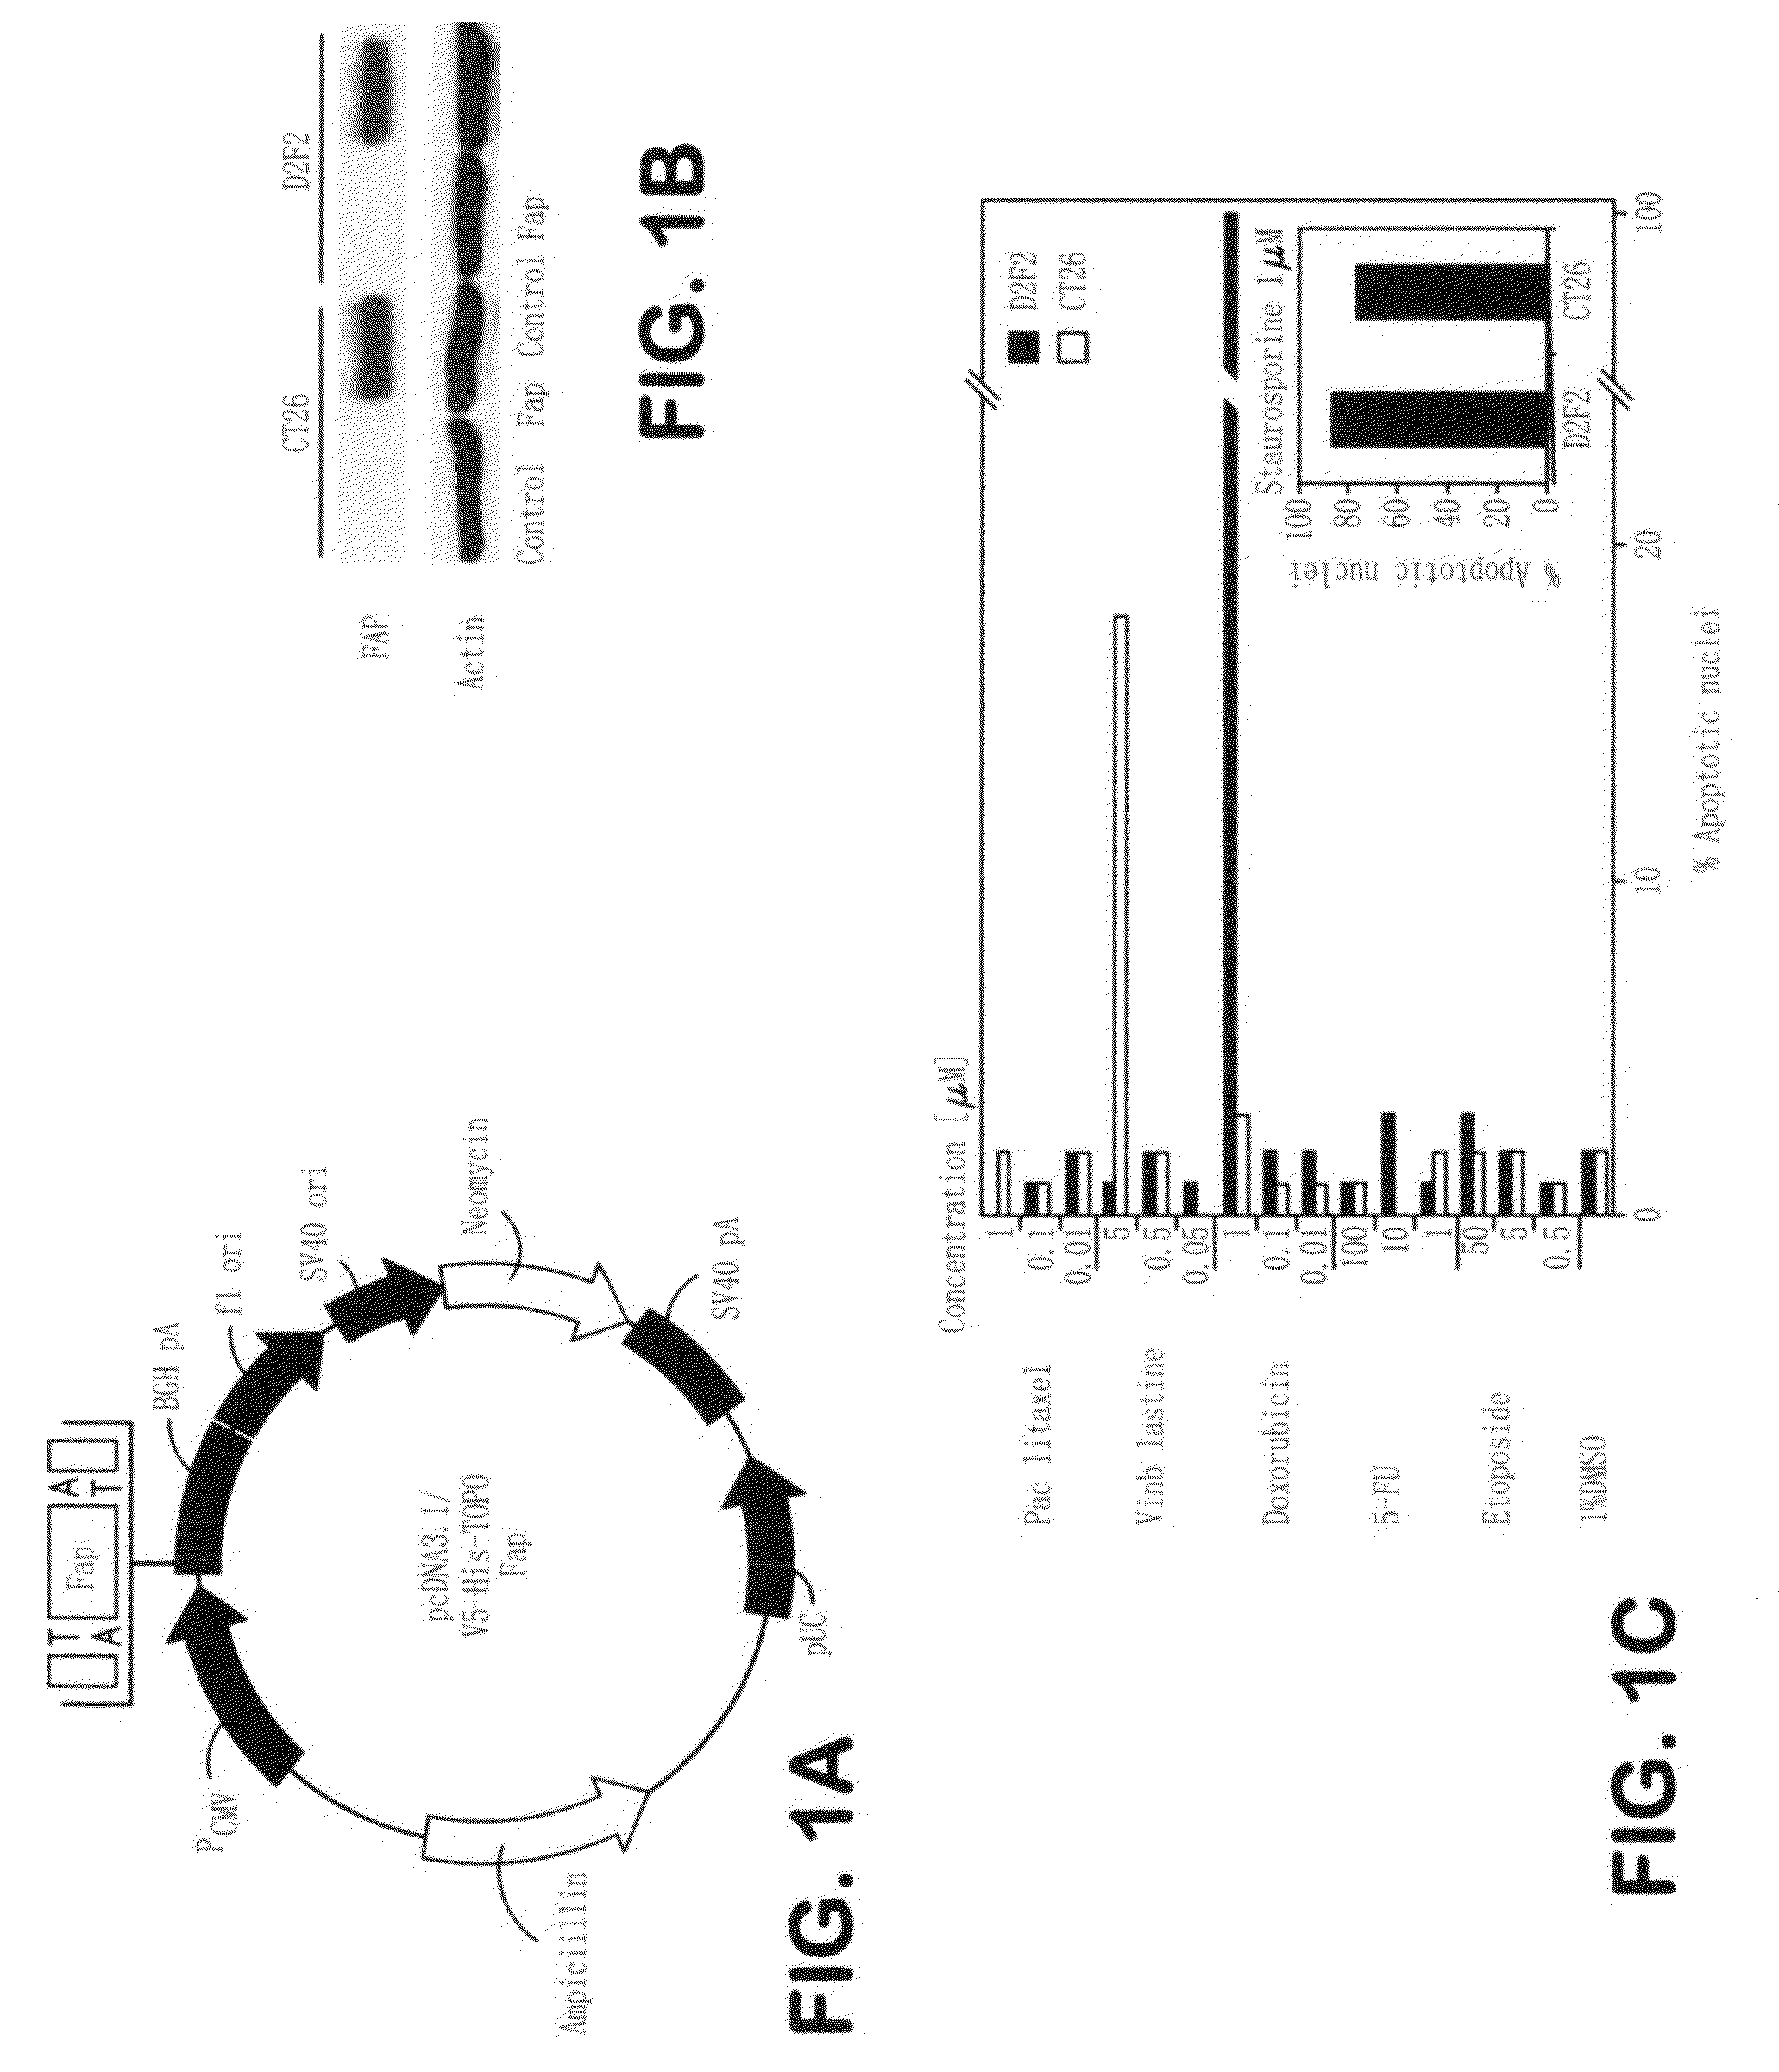 DNA composition against tumor stromal antigen FAP and methods of use thereof